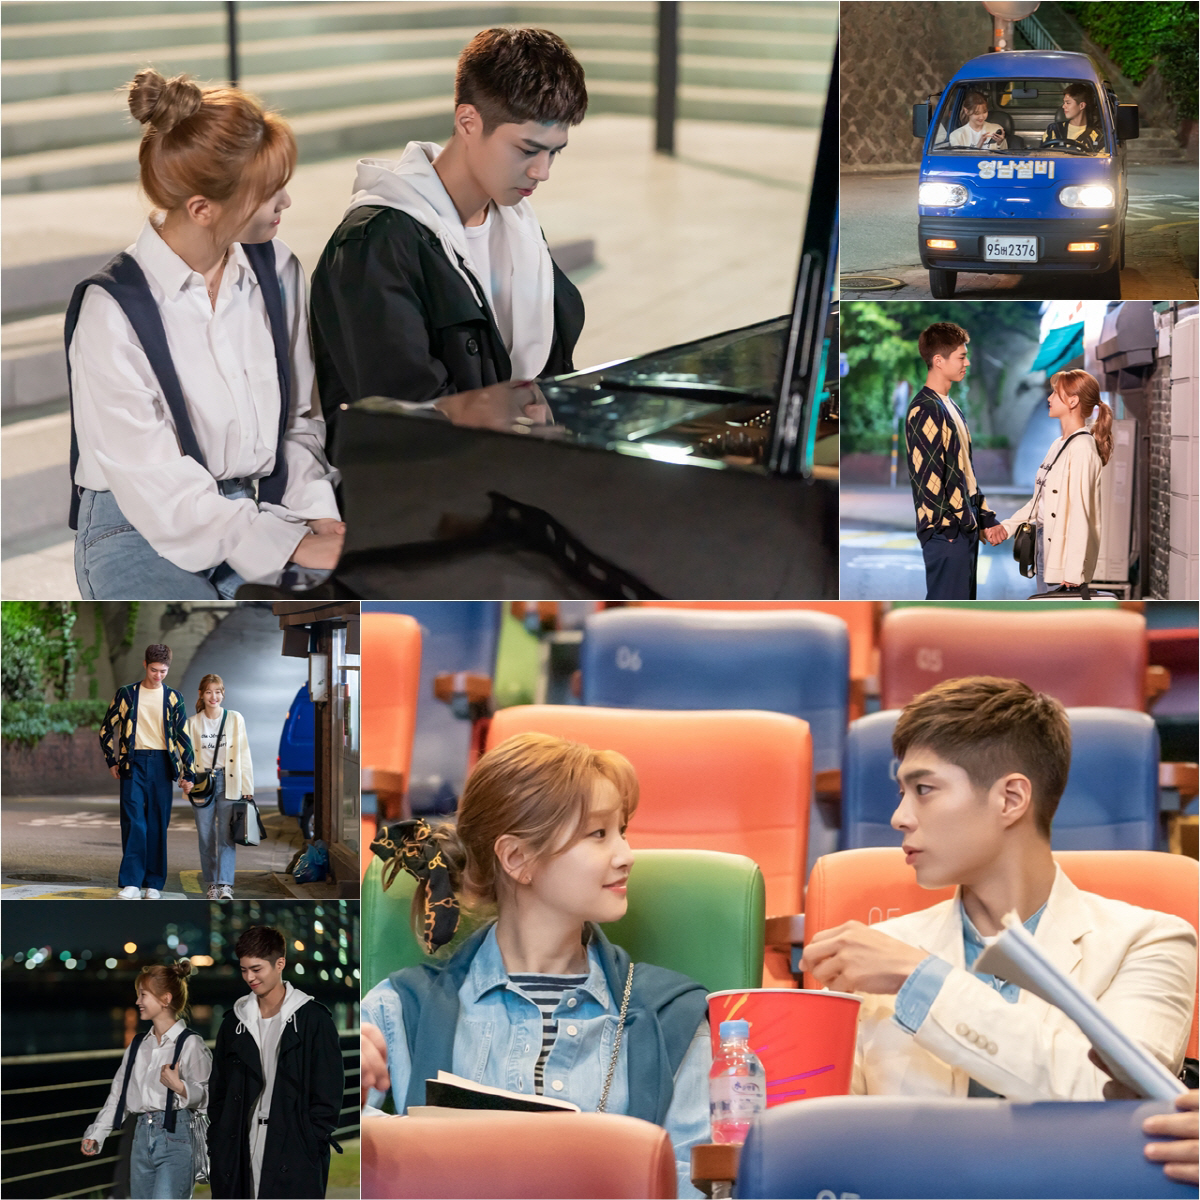 Record of Youth Park Bo-gum and Park So-dams dream challenge, a romance that is full of excitement fills the hearts of viewers.A new chapter called Sulm was opened in tvN Mon-Tue drama Record of Youth (played by Ha Myung-hee, directed by Ahn Gil-ho).Park Bo-gum and Park So-dam, who endure and overcome difficult today to achieve their dreams.The unexpected excitement that came to them heralds a great change: the two, who know the weight of reality better than anyone, shared pain and permeated each other.Friend, and finally the romance of two people who have developed into lovers in the relationship between Passion and fan, which was the only comfort and escape, are pouring hot.I know how hard it is to take one step toward my dream, so the change of Sa Hye-joon and Ahn Jung-ha, who are comforted by being together, made the viewers feel excited.So the ranking of the topic was Olki and showed off its power.In the third week of September, which was announced by Good Data Corporation, a topic analysis agency, JiSoo (September 14-September 20), it ranked first for two consecutive weeks in the entire drama category including terrestrial, full-length and cable, and also ranked first in the Influential Program Drama for two consecutive weeks in content influence JiSooo (CPI Poored by RACOI).At the heart of the viewers over-immersion is Park Bo-gum and Park So-dam.Although I am hurt by the unfavorable reality, I have poured out the sympathy The Warlords every time I put the youth today in reality, trying to achieve my dream with my own power without giving up.The new page of Sulm on the hot growth record is causing an explosive reaction.In the meantime, Park Bo-gum, Park So-dams Simkung The Warlords, B-cuts, reminds me of the excitement.The beginning of the relationship is moral, but it became a friend who was stable with Sa Hye-joon, who had a lot of consensus.The Confessions, I wanted to say thank you when I met you, to Sa Hye-joon, who was a force for me, became a great force for Sa Hye-joon, who was struggling with his self-esteem.At the moment when I was one step closer to the dream of Actor, Sa Hye-joon realized the reality of emotion about An Jeong-ha.His rain-confessions, I think you like it, gave viewers a stop thrill as well as stability.In the photo, I feel the excitement and trembling in the hands of the lover in the picture.Sa Hye-joon, who was the comfort of Ahn Jeong-ha, is now stable to make him laugh. Sa Hye-joon, who only endured alone, is the first to show his sincerity and depend on him.The romance of two youths that resemble each other is so sympathetic and excited.It is also the reason why the first kiss of the two people came to the heart over the excitement at the end of the song I will remember the two hands that caught the step of many hesitations.The warm and exciting kiss ending that touches the hard and tired mind is the Warlords, which is one of the viewers.The two people sitting side by side in front of the piano raise the jiSoo even more.Unlike Sa Hye-joon and An Jeong-has pink romance, reality is still not green.Sa Hye-joons drama casting was canceled, and Ahn Jung-ha became a formal Desiigner, but the conflict with Jinju Desiigner deepened.I wonder what the romance of the two will act as a variable for the youth who runs toward the dream, and what else is waiting behind the wall they have to overcome.Record of Youth production team said, Watch and see if the two people who have become special to each other can achieve both dreams and love and have a brilliant tomorrow.On the other hand, tvN Mon-Tue drama Record of Youth is broadcast on tvN every Monday and Tuesday at 9 pm.